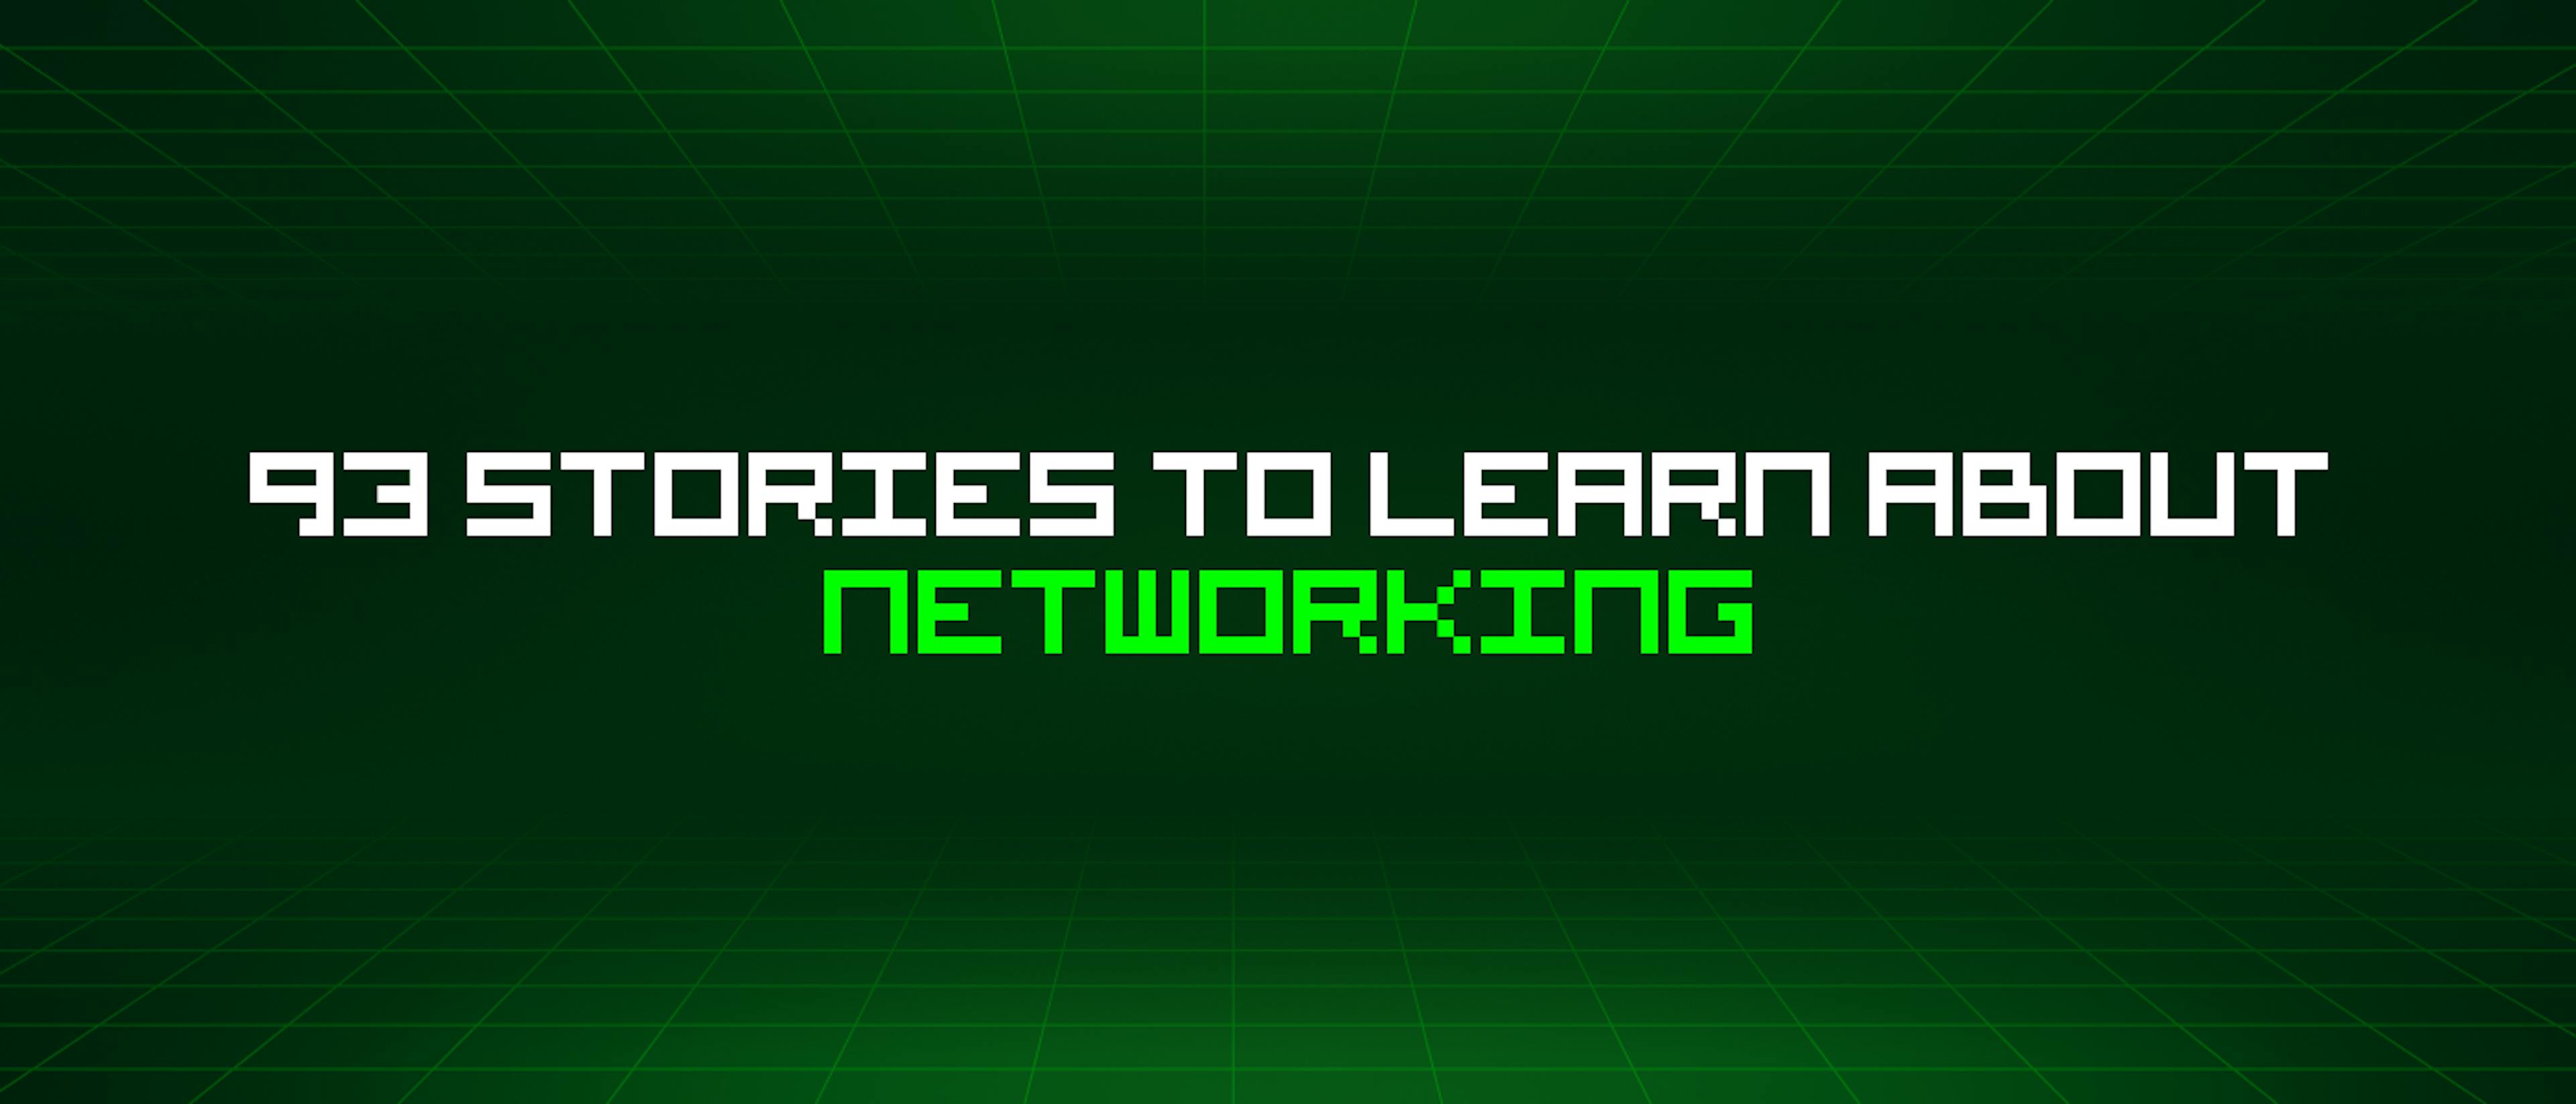 /93-stories-to-learn-about-networking feature image